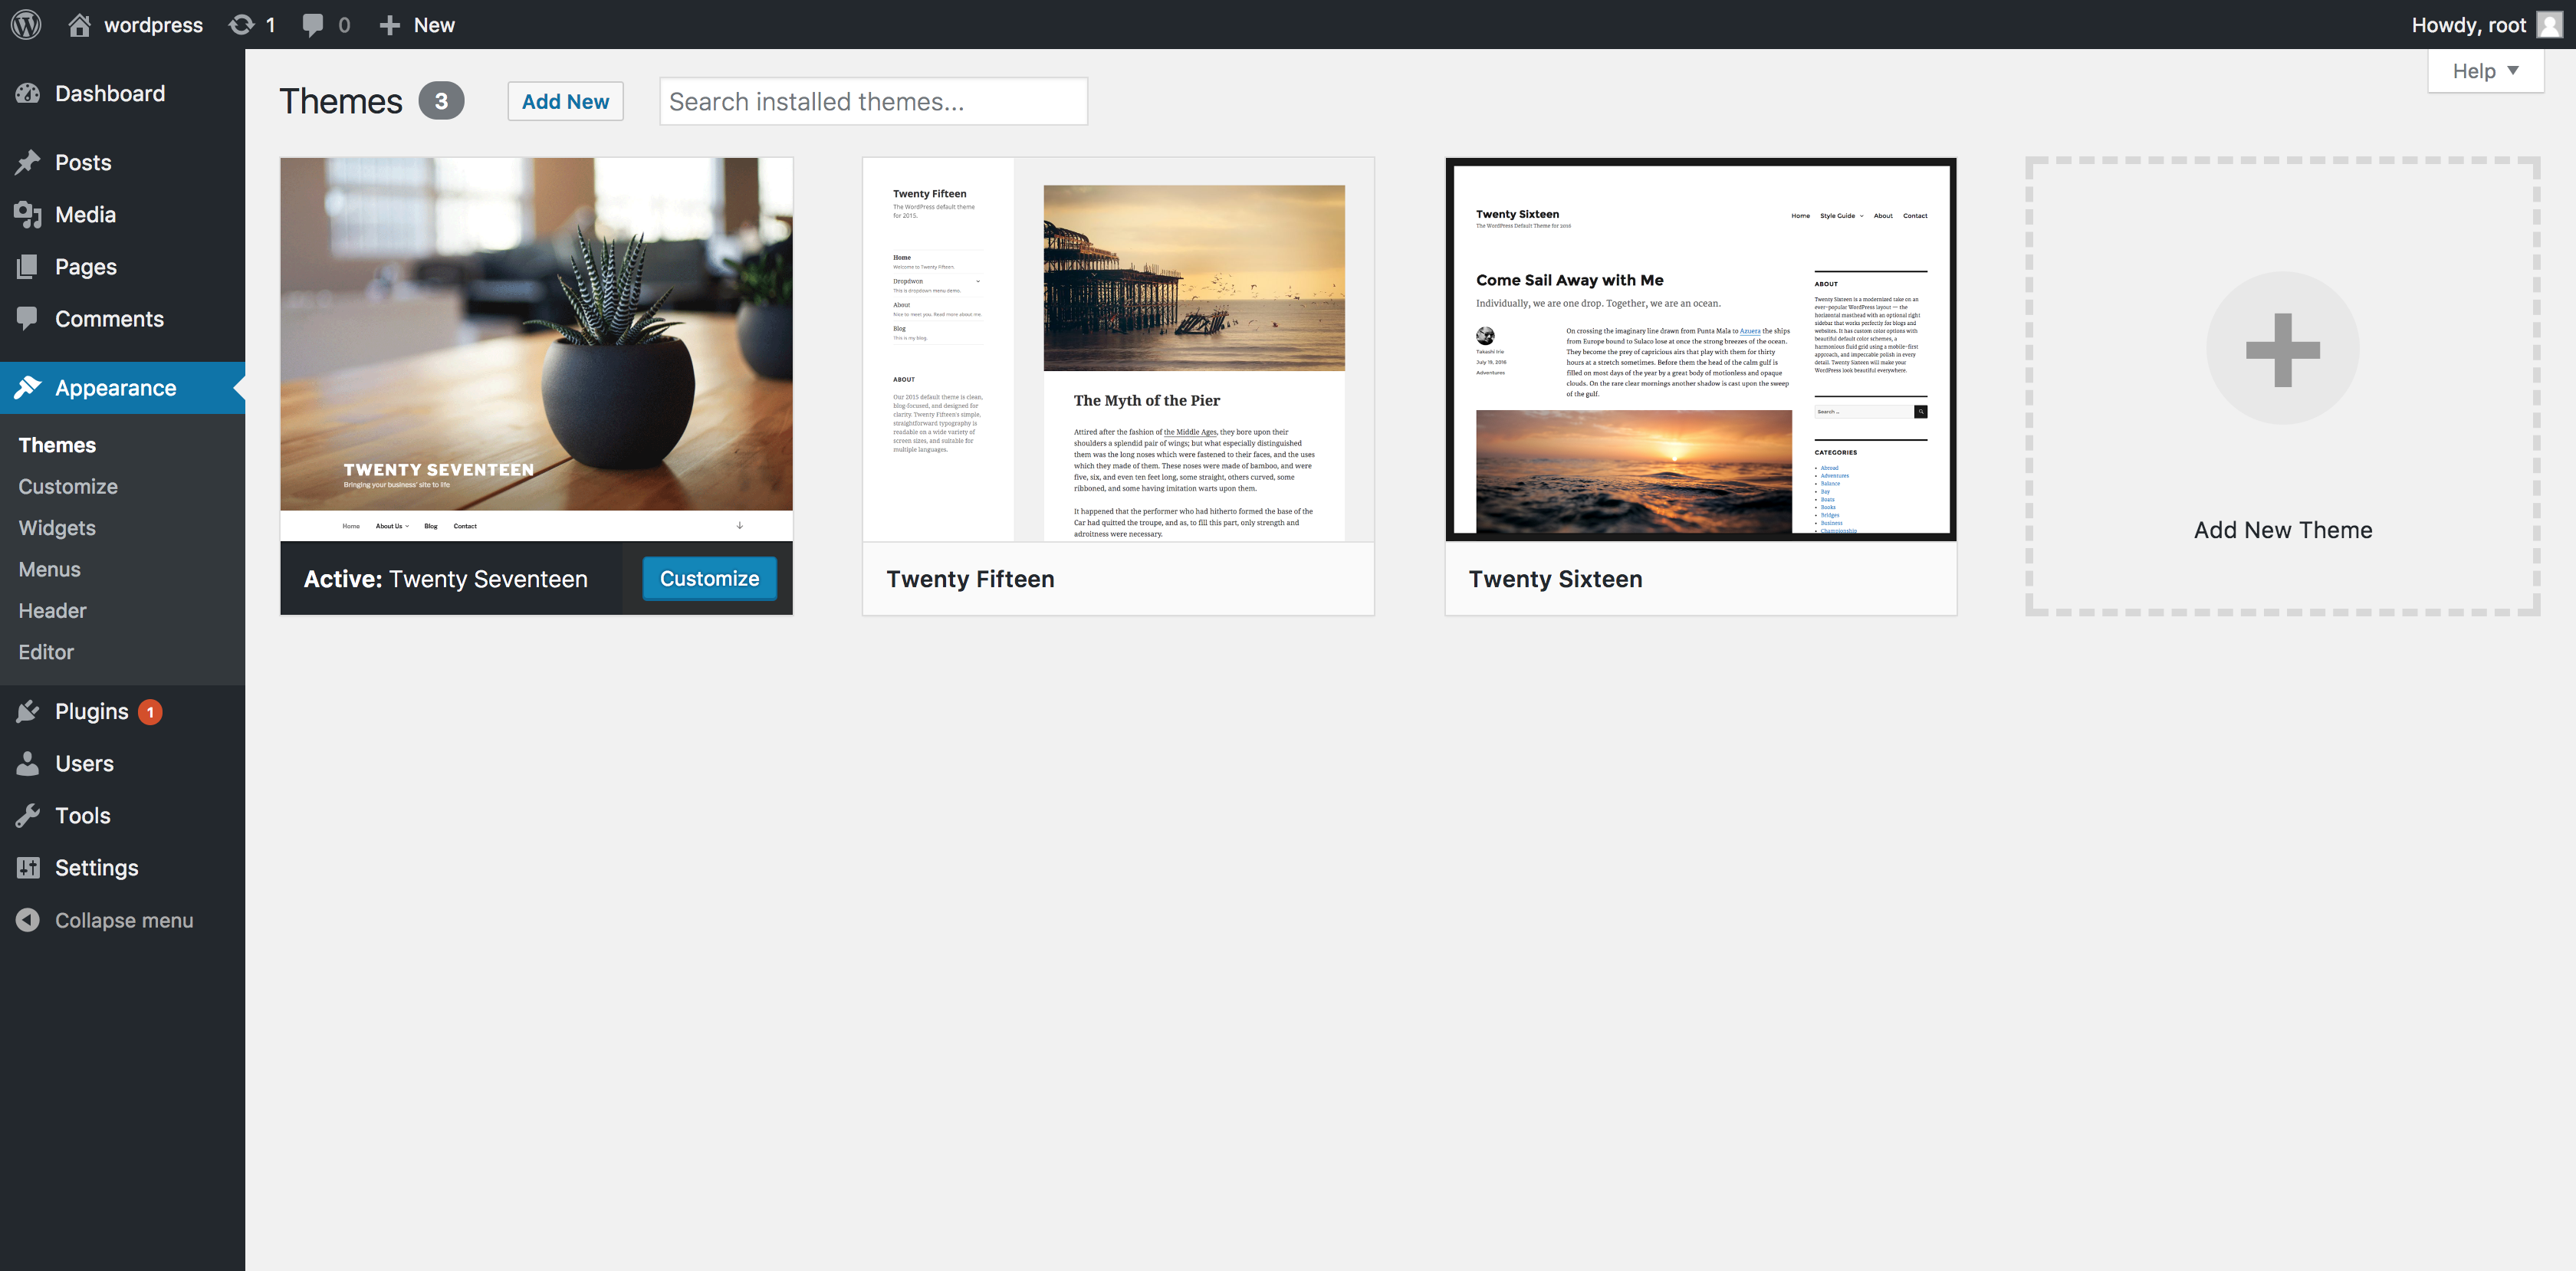 How To Install WordPress Themes